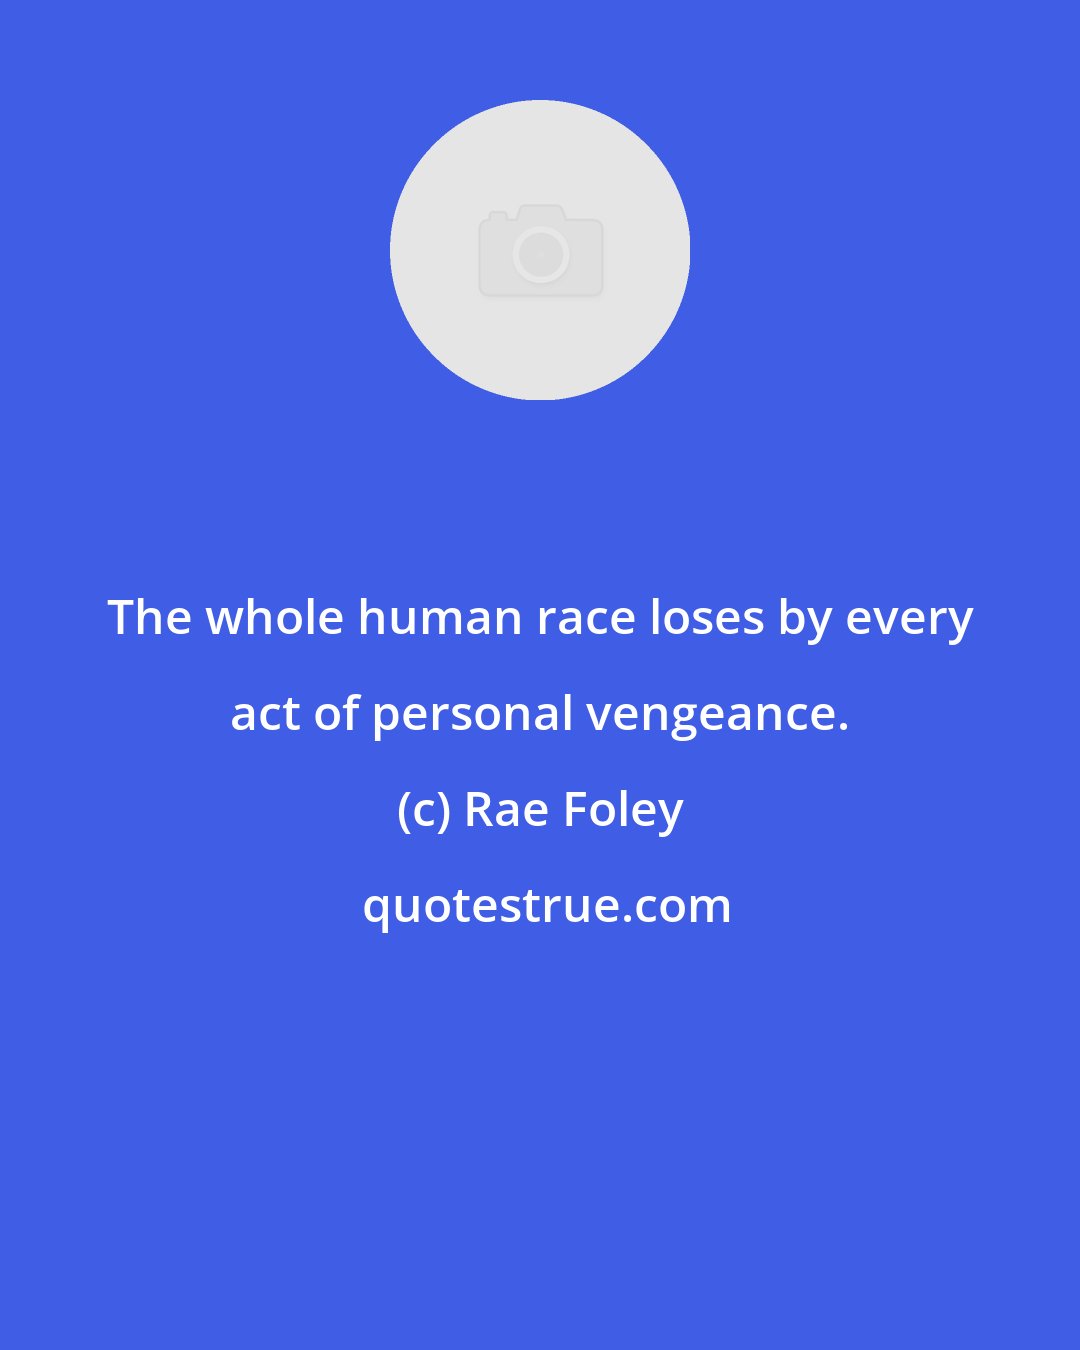 Rae Foley: The whole human race loses by every act of personal vengeance.